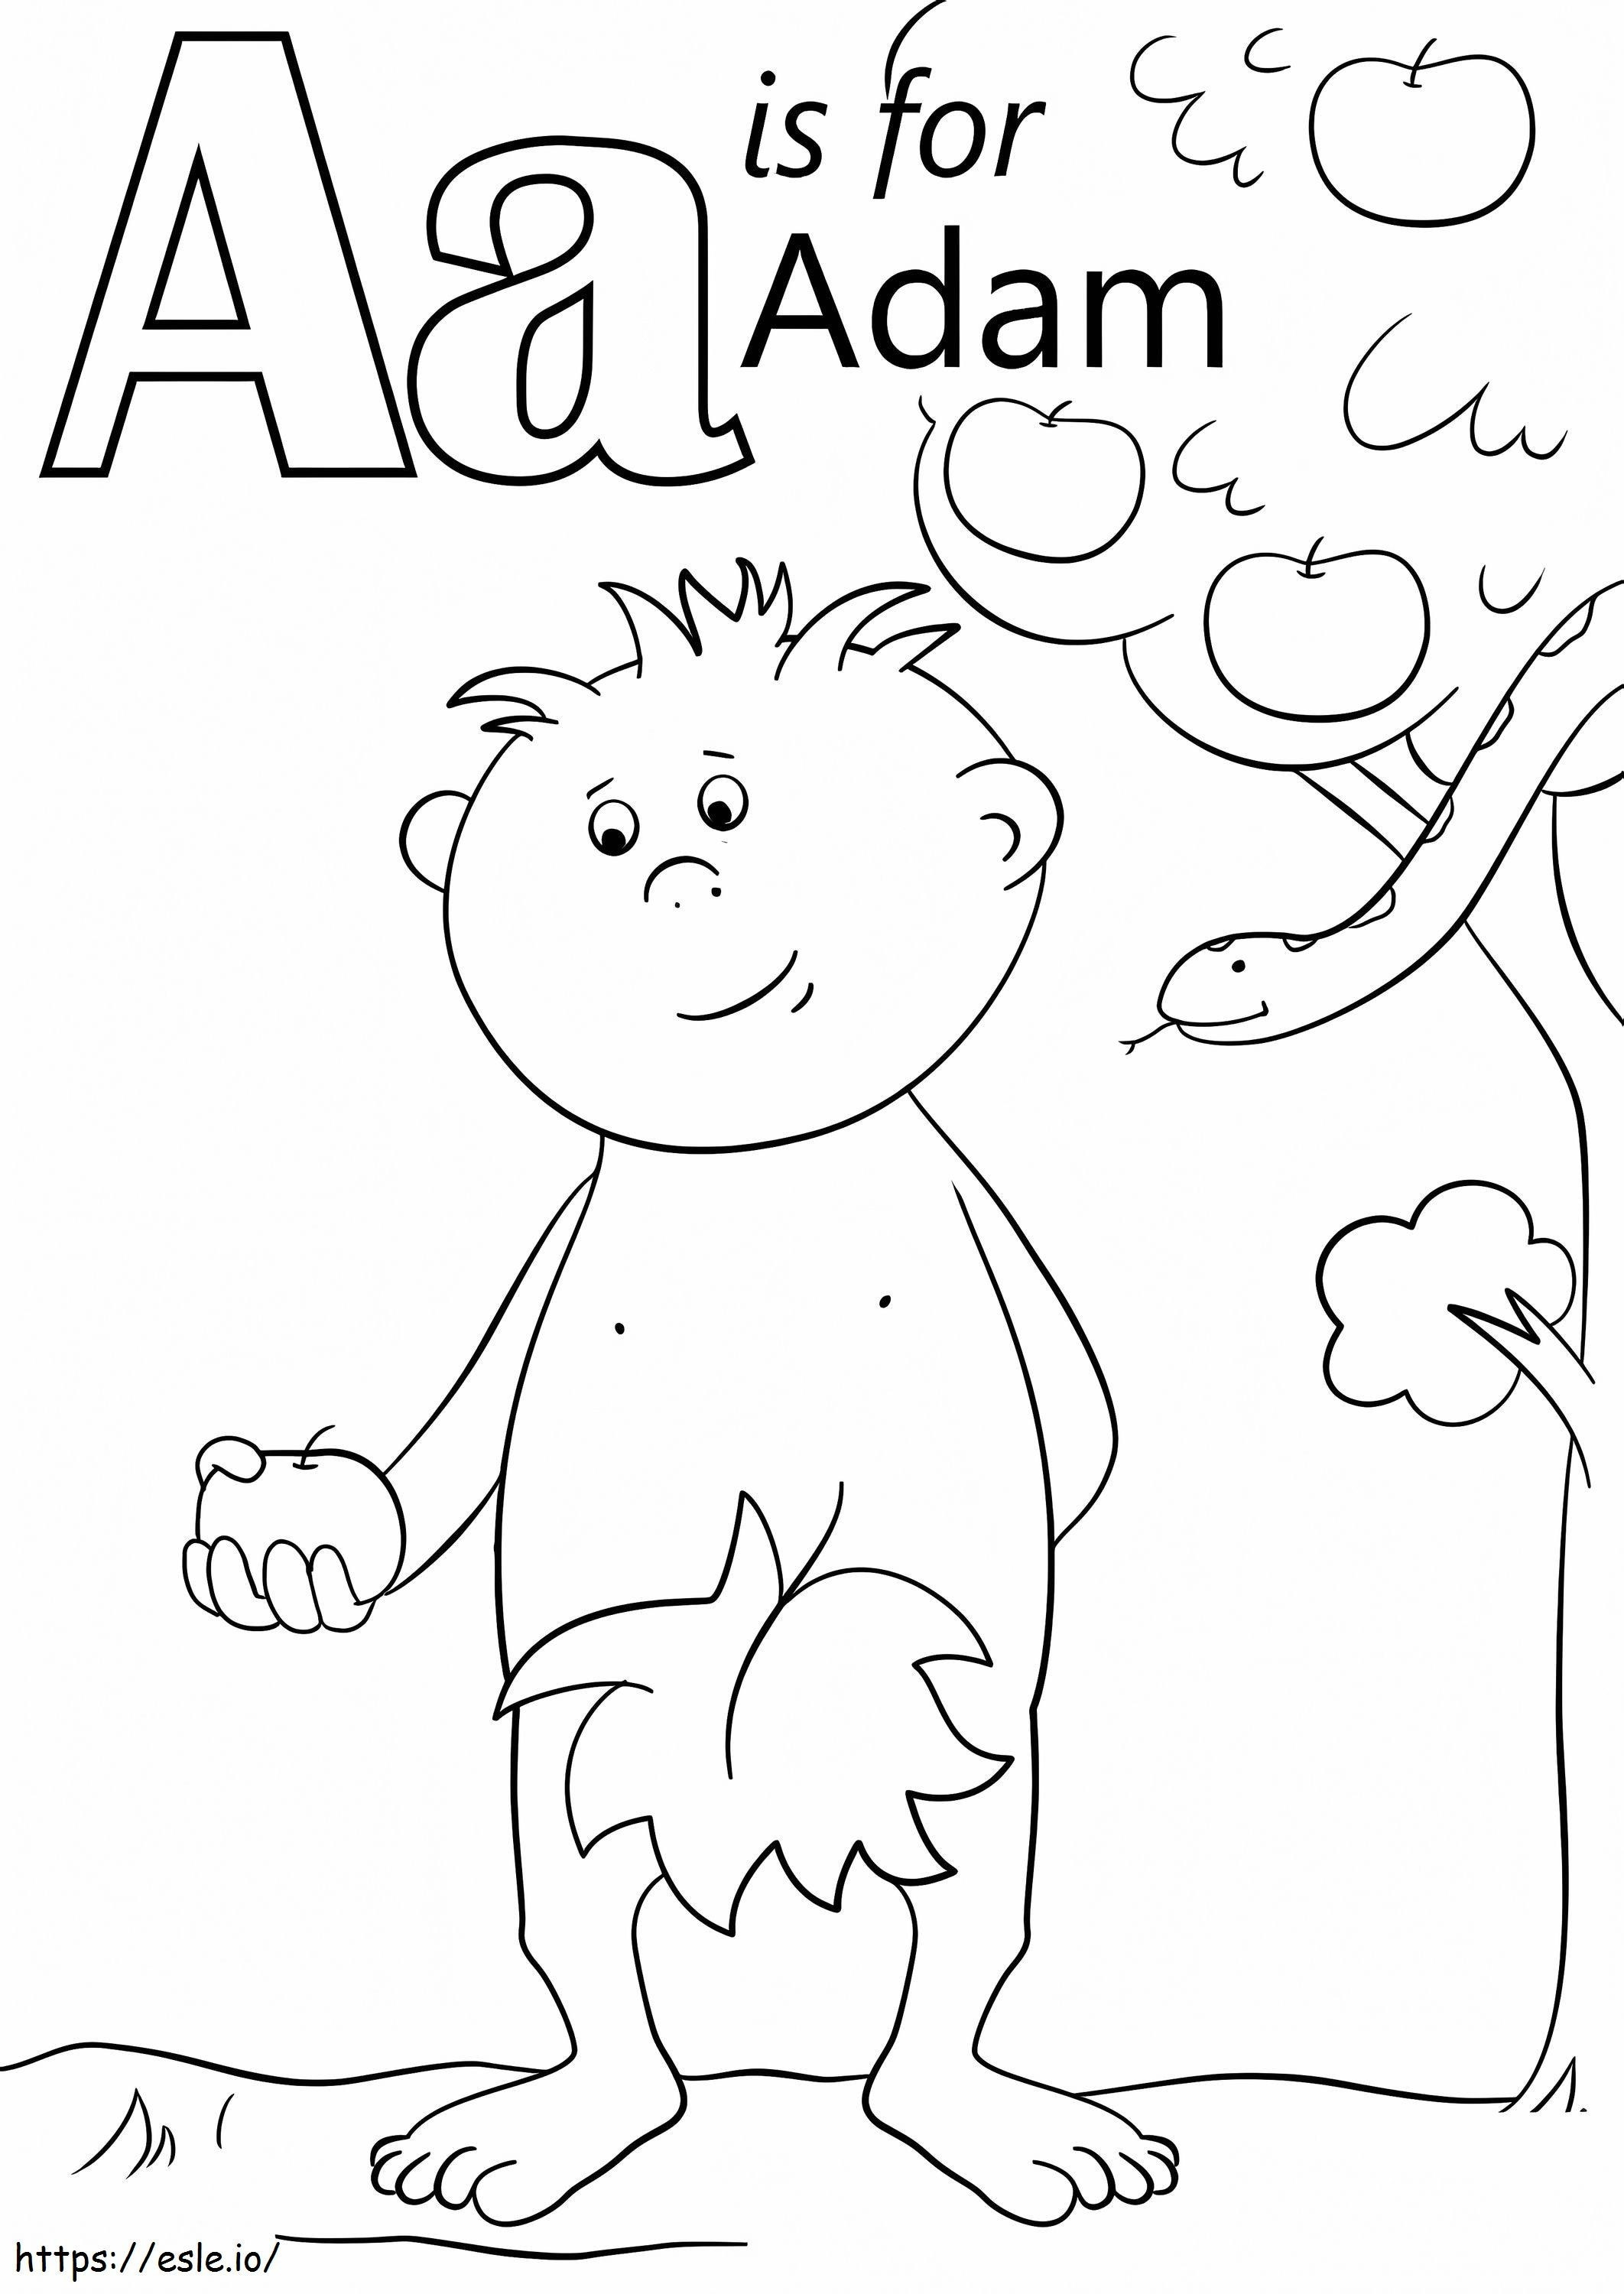 Adam Letter A coloring page